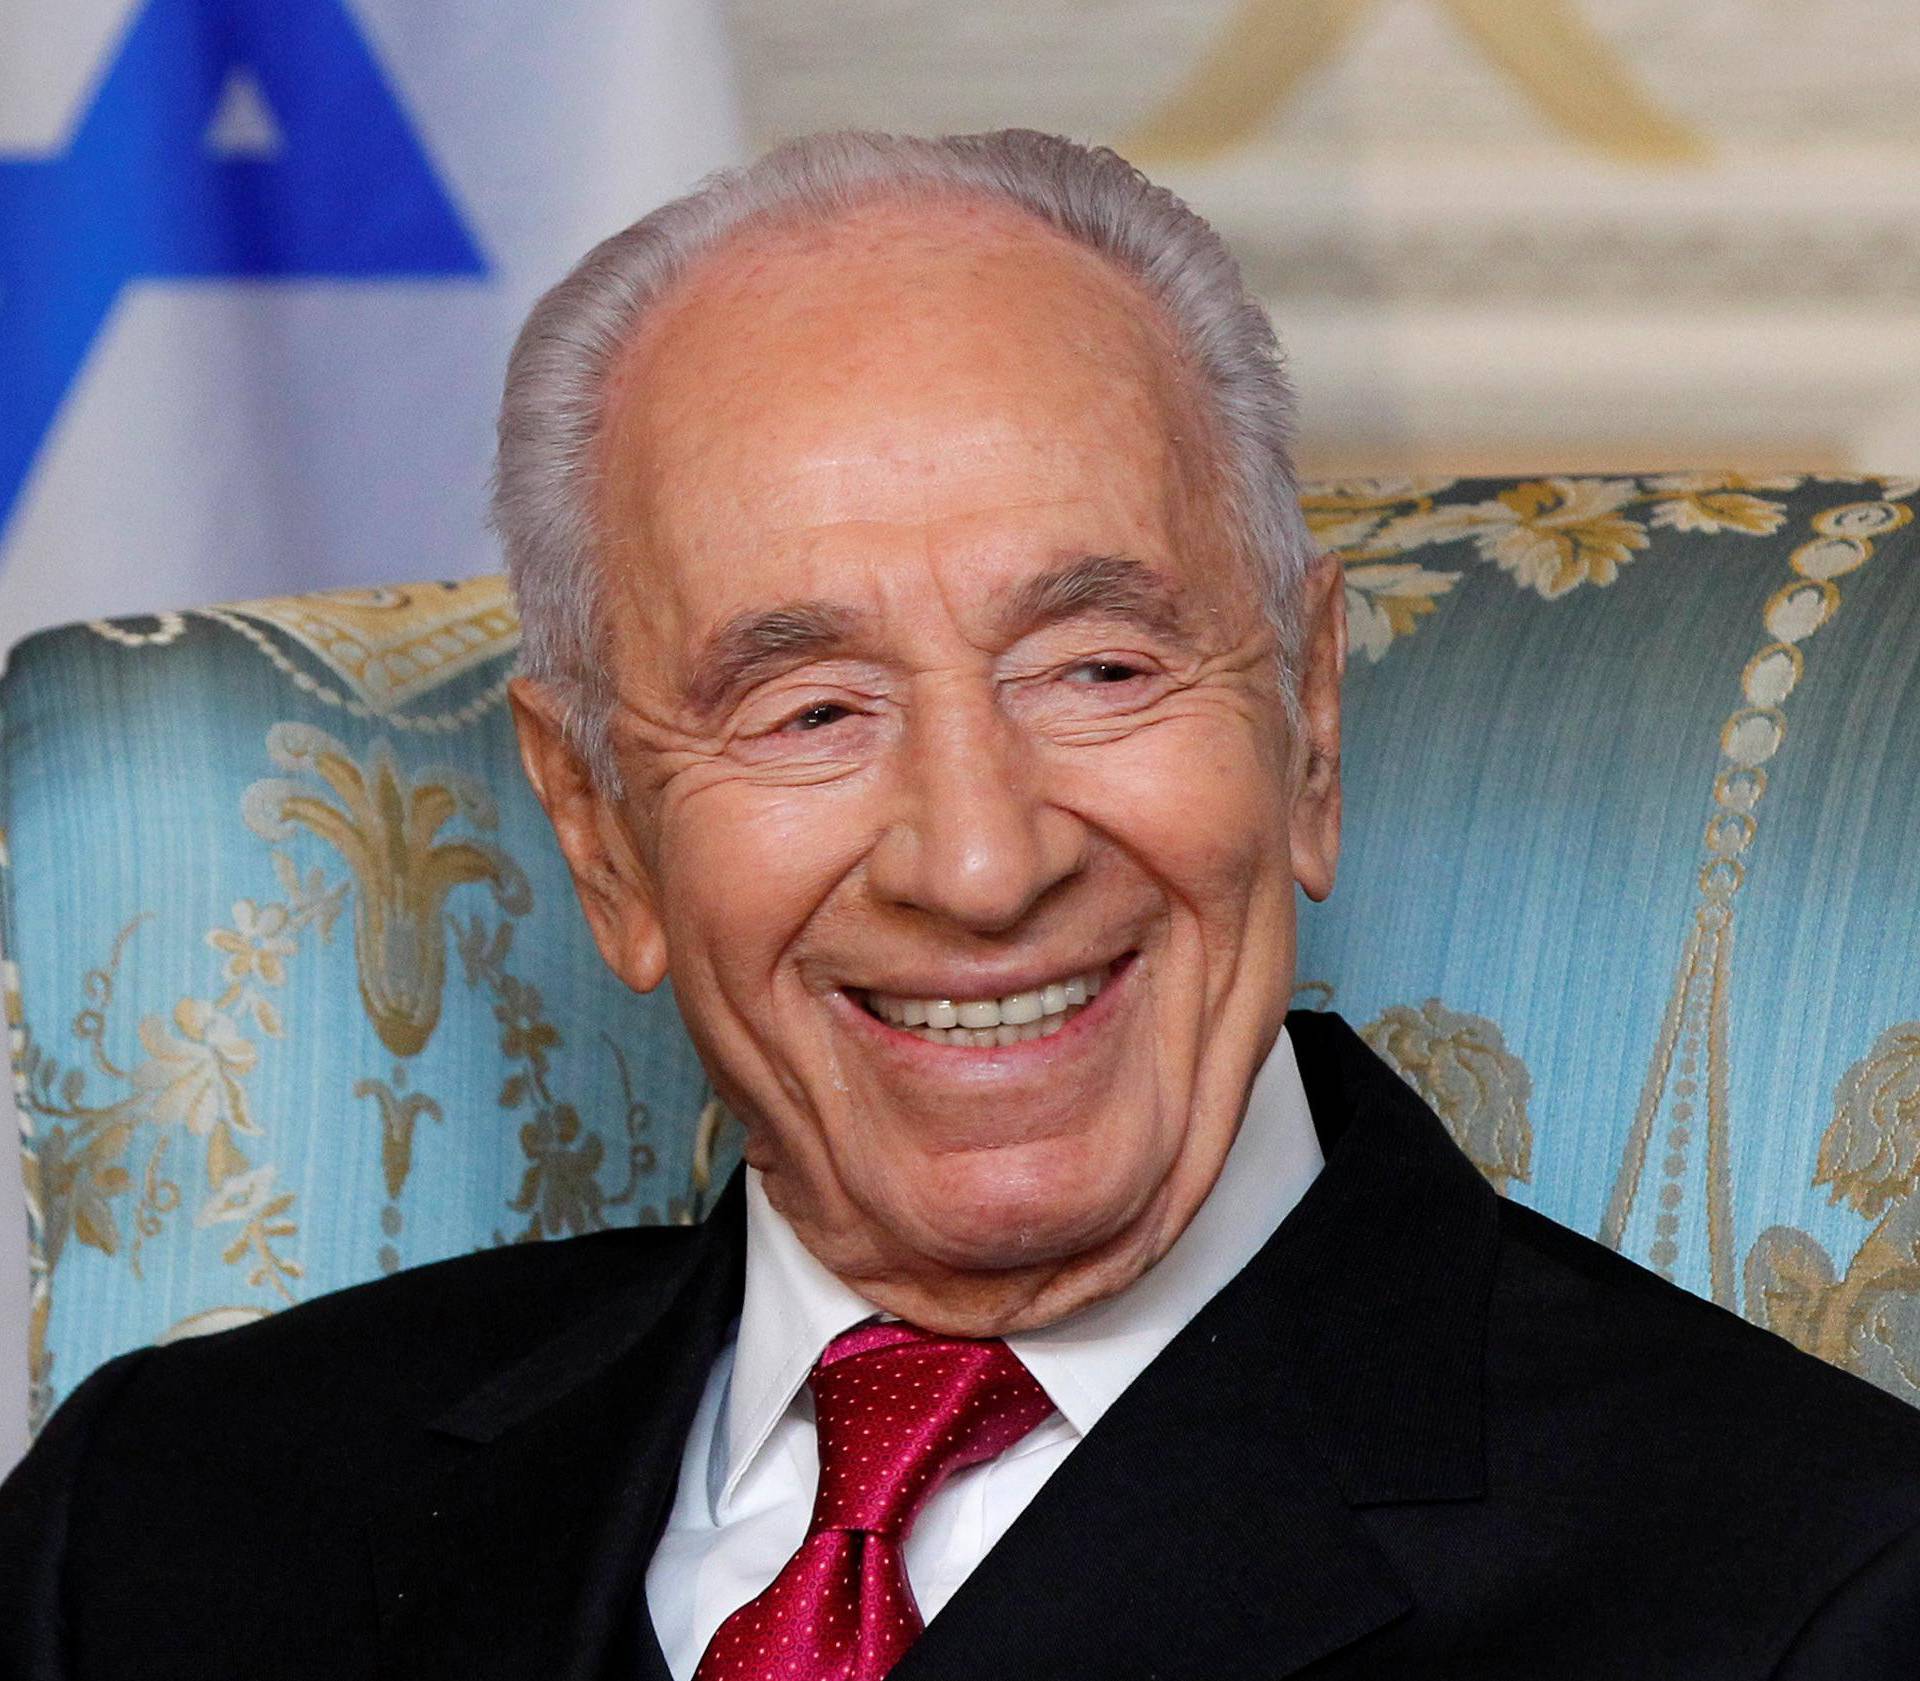 File photo of Israel's President Shimon Peres taking part in a meeting at Rideau Hall in Ottawa